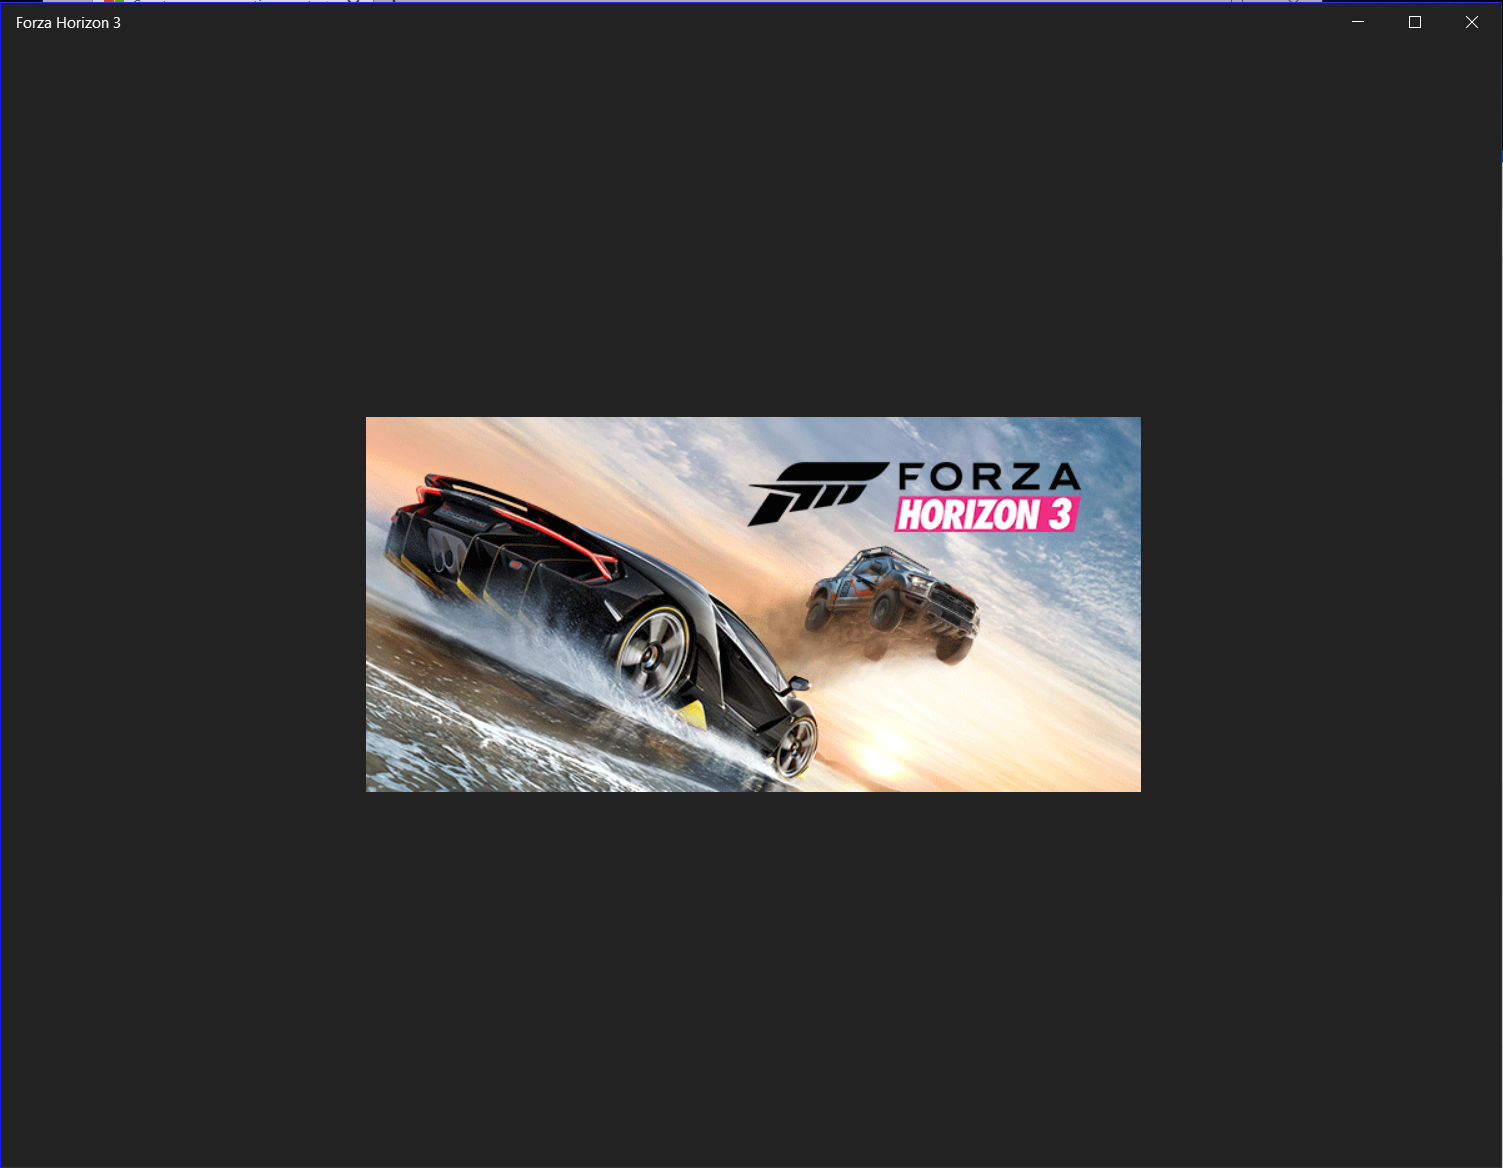 Forza Horizon 3 does not work on this device - Microsoft Community